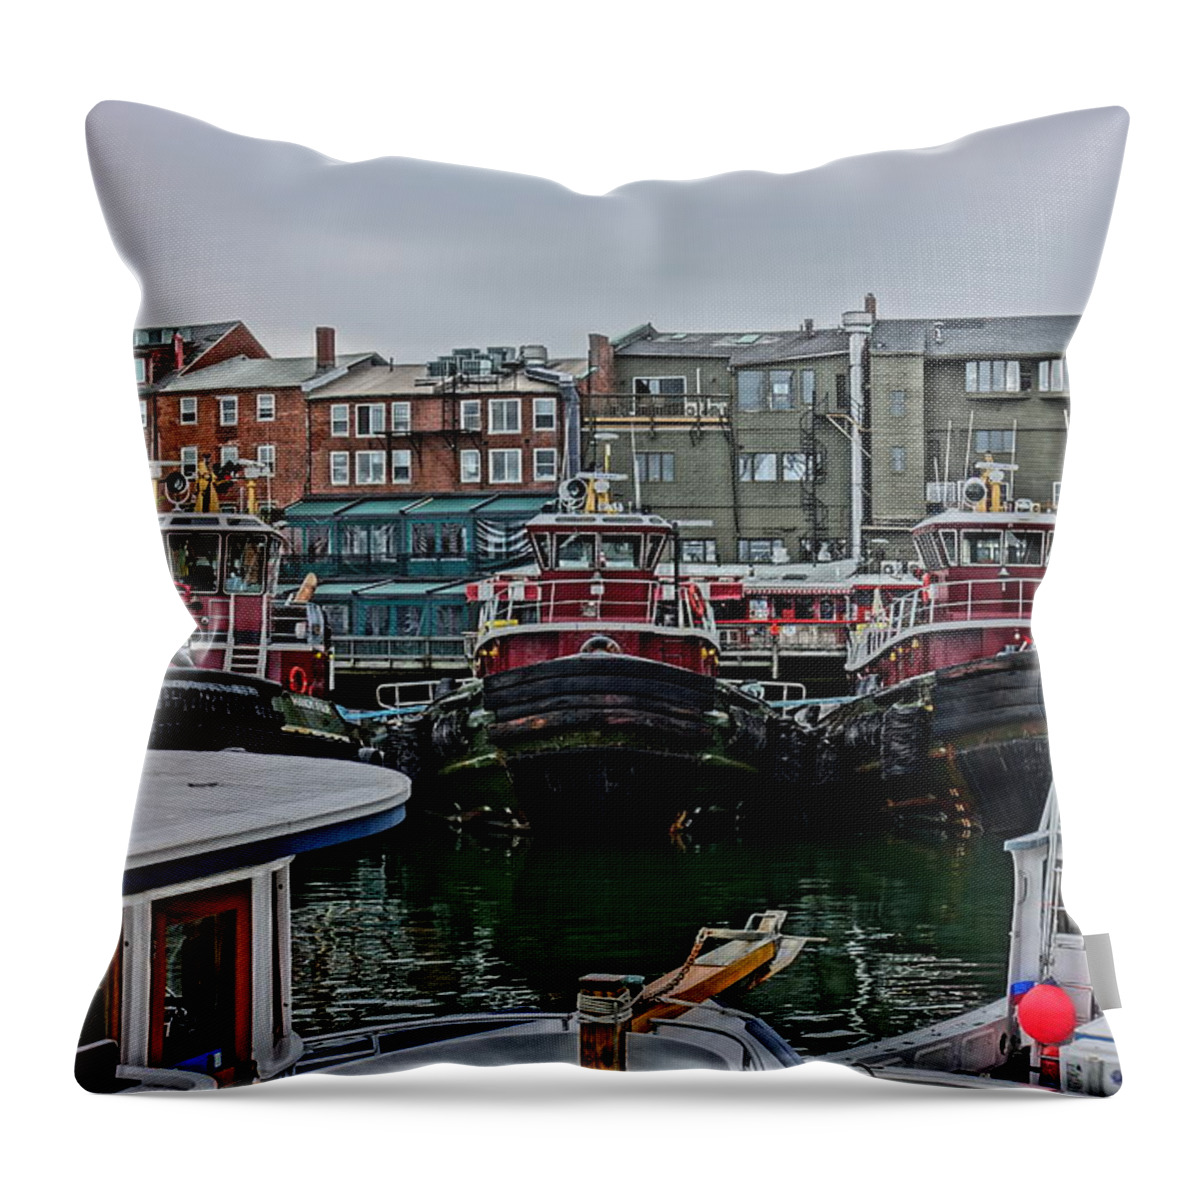 Tug Boat Throw Pillow featuring the photograph Portsmouth Tug Boats by Patricia Caron